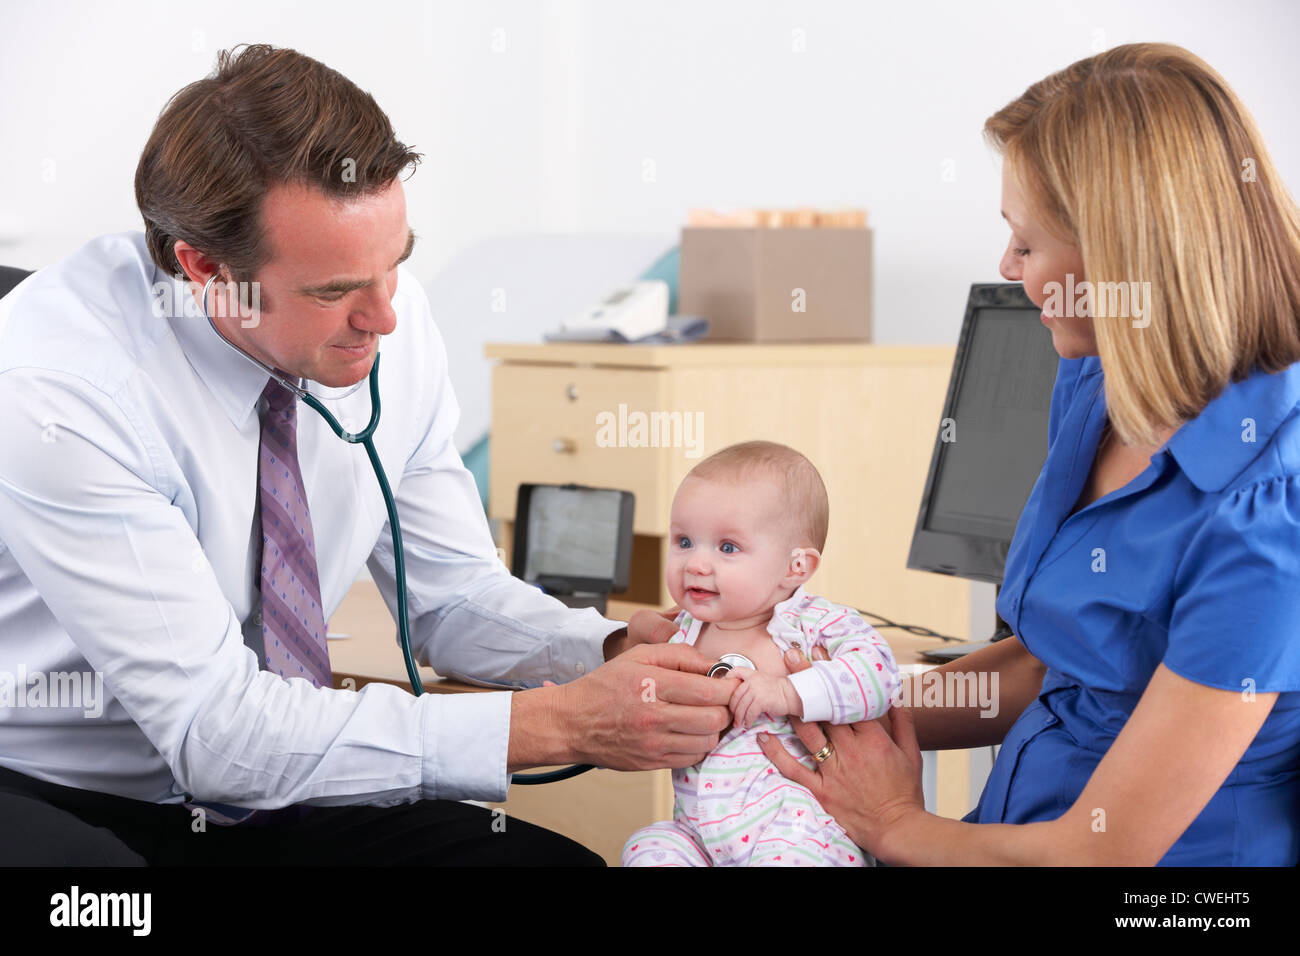 Mother and baby in doctor's surgery Stock Photo